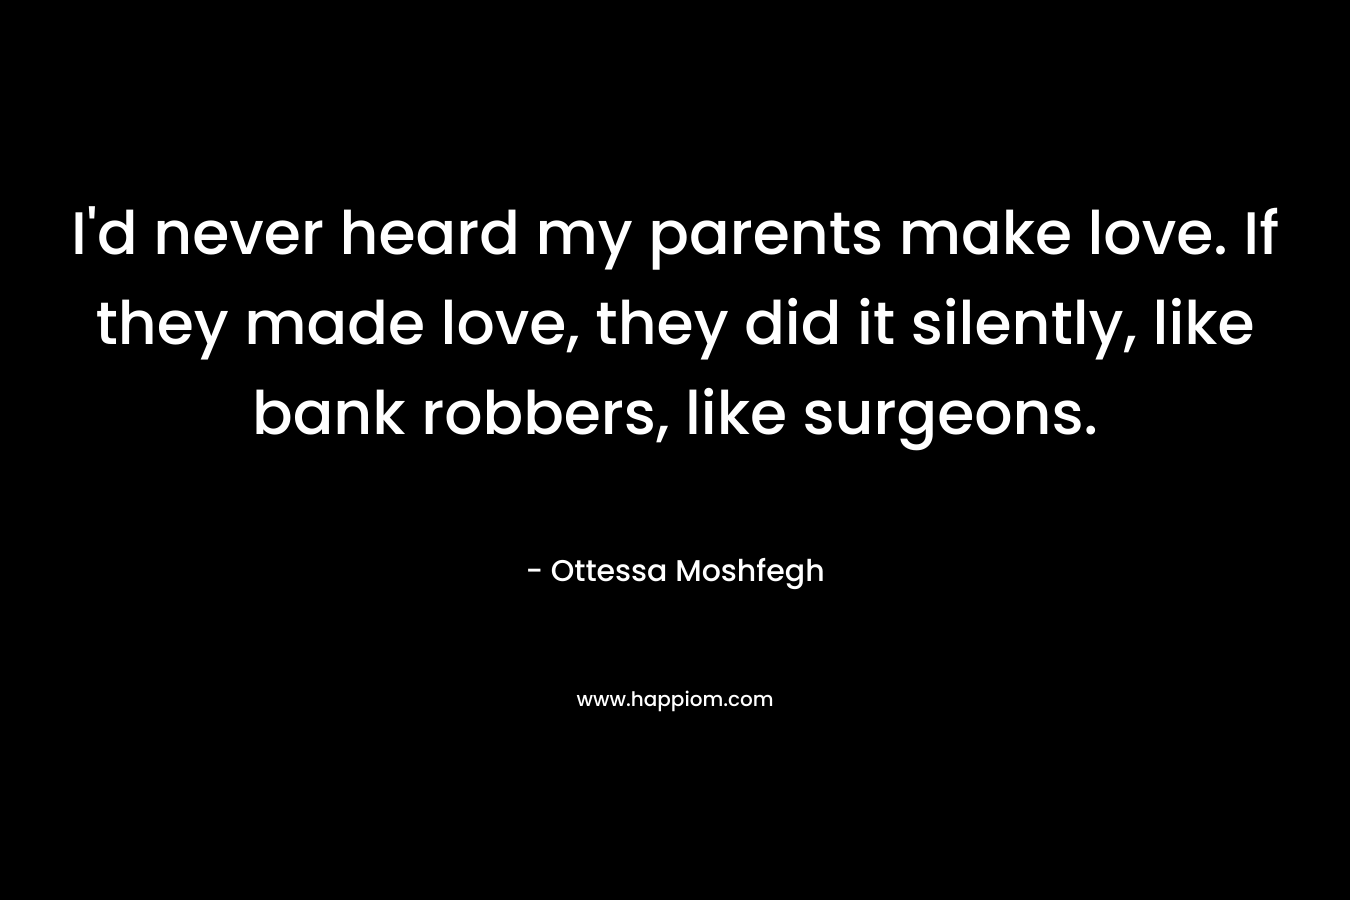 I’d never heard my parents make love. If they made love, they did it silently, like bank robbers, like surgeons. – Ottessa Moshfegh